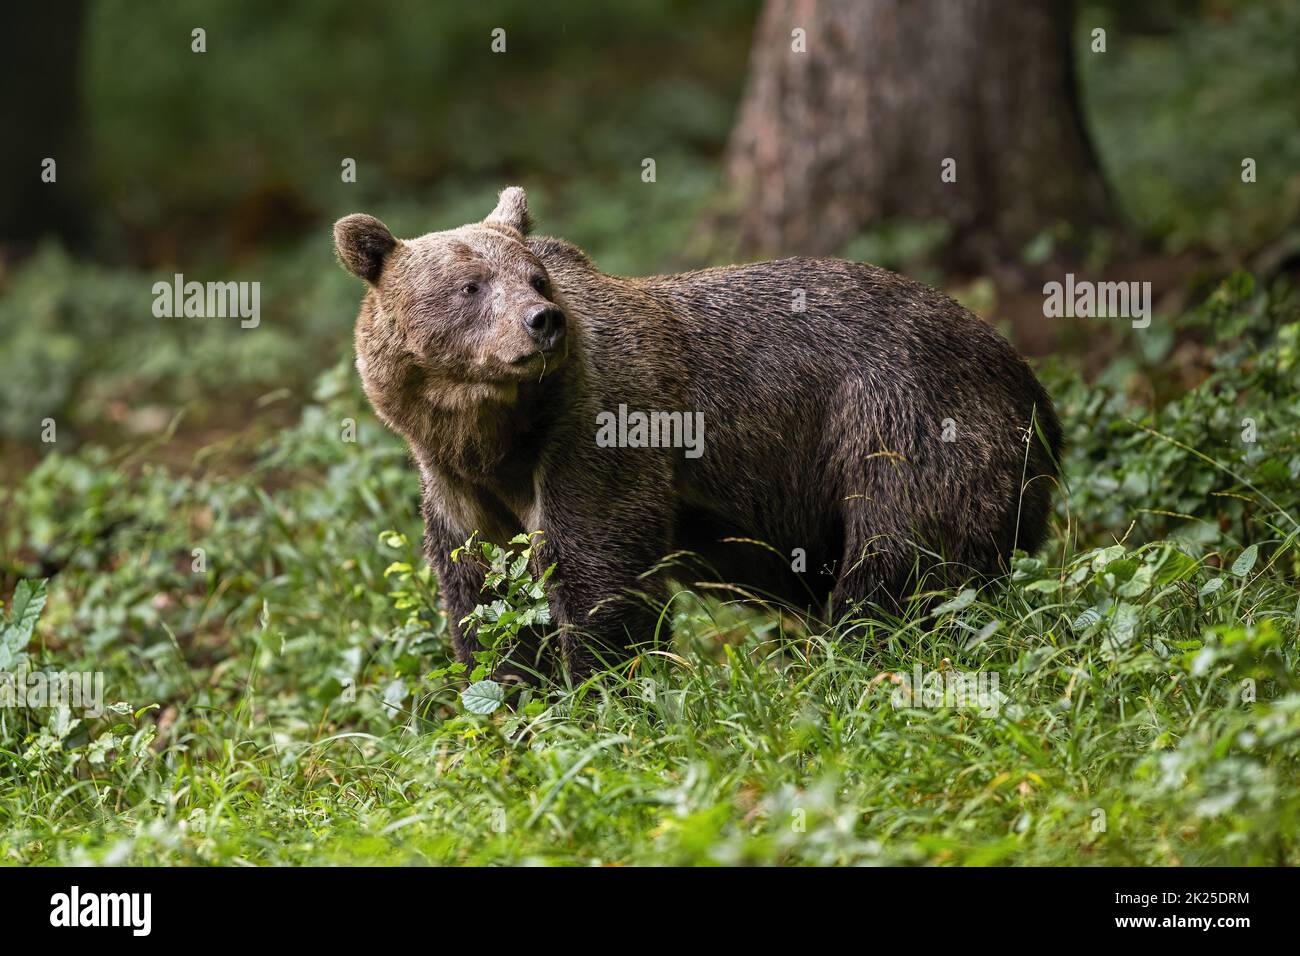 Brown bear standing in woodland in summertime nature Stock Photo